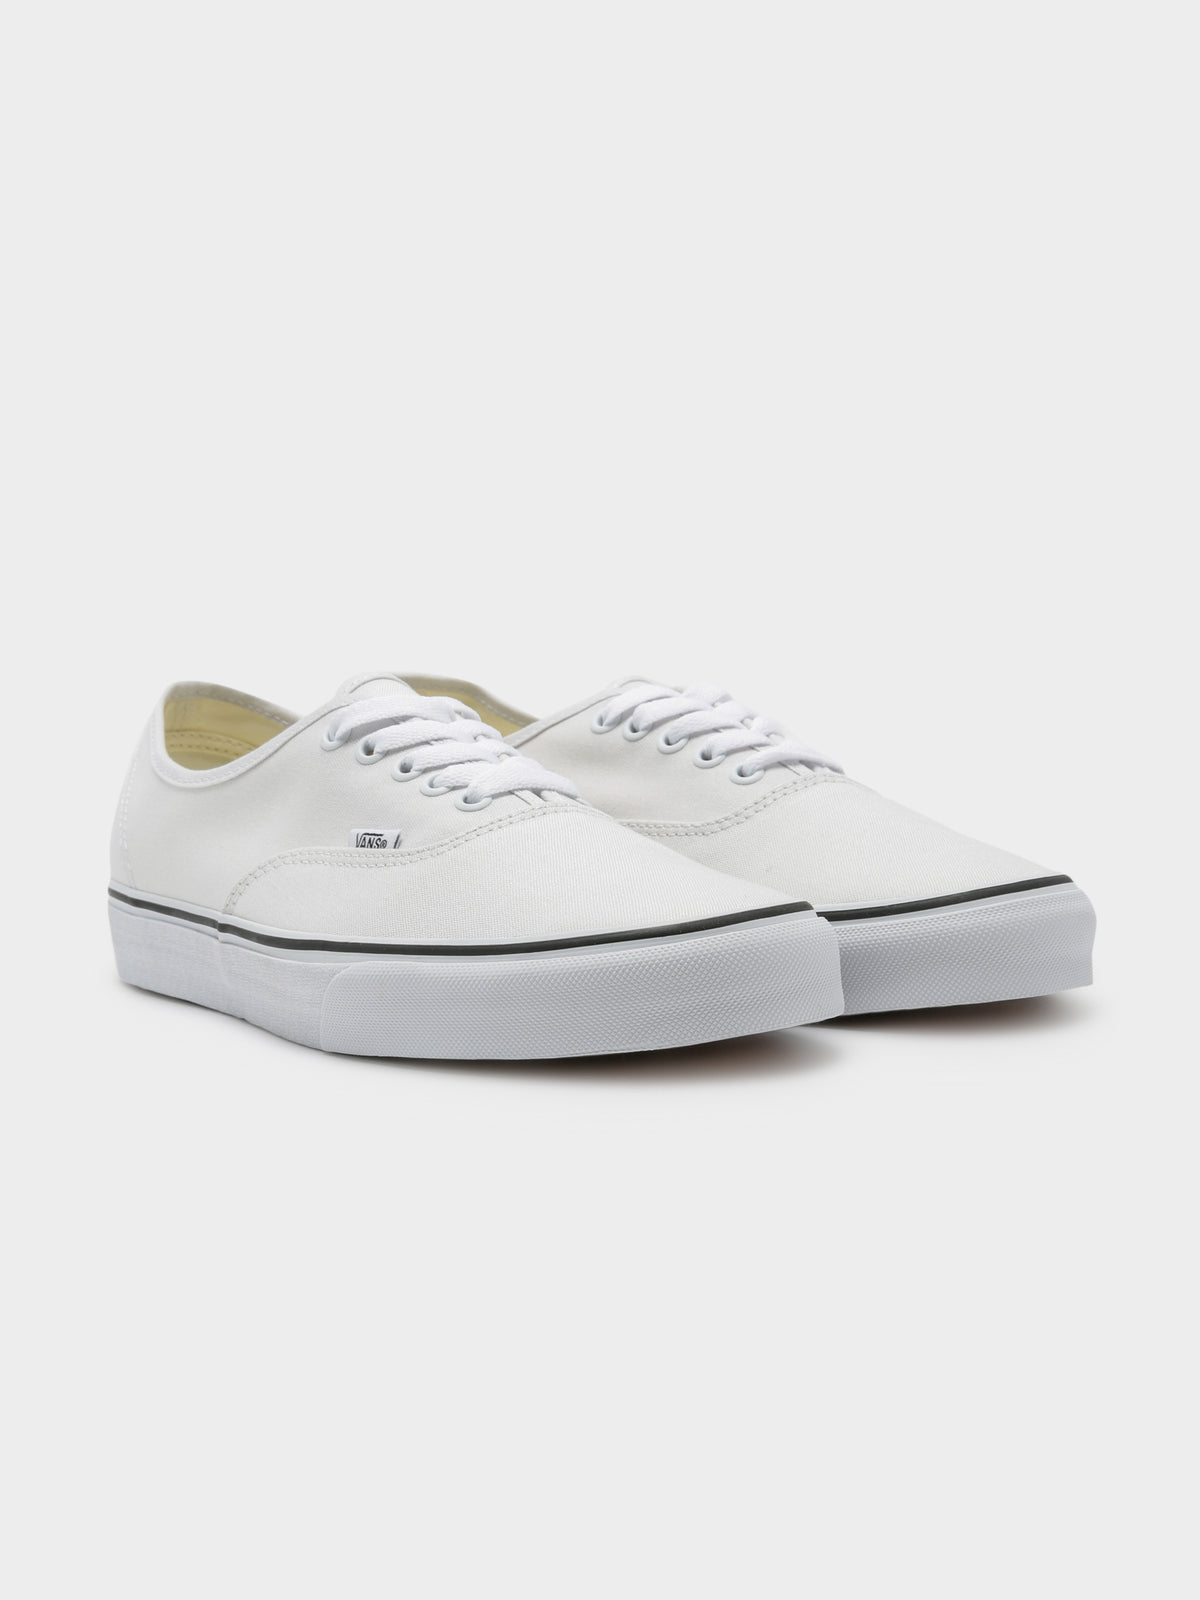 Unisex Authentic Color Theory Sneakers in Cream